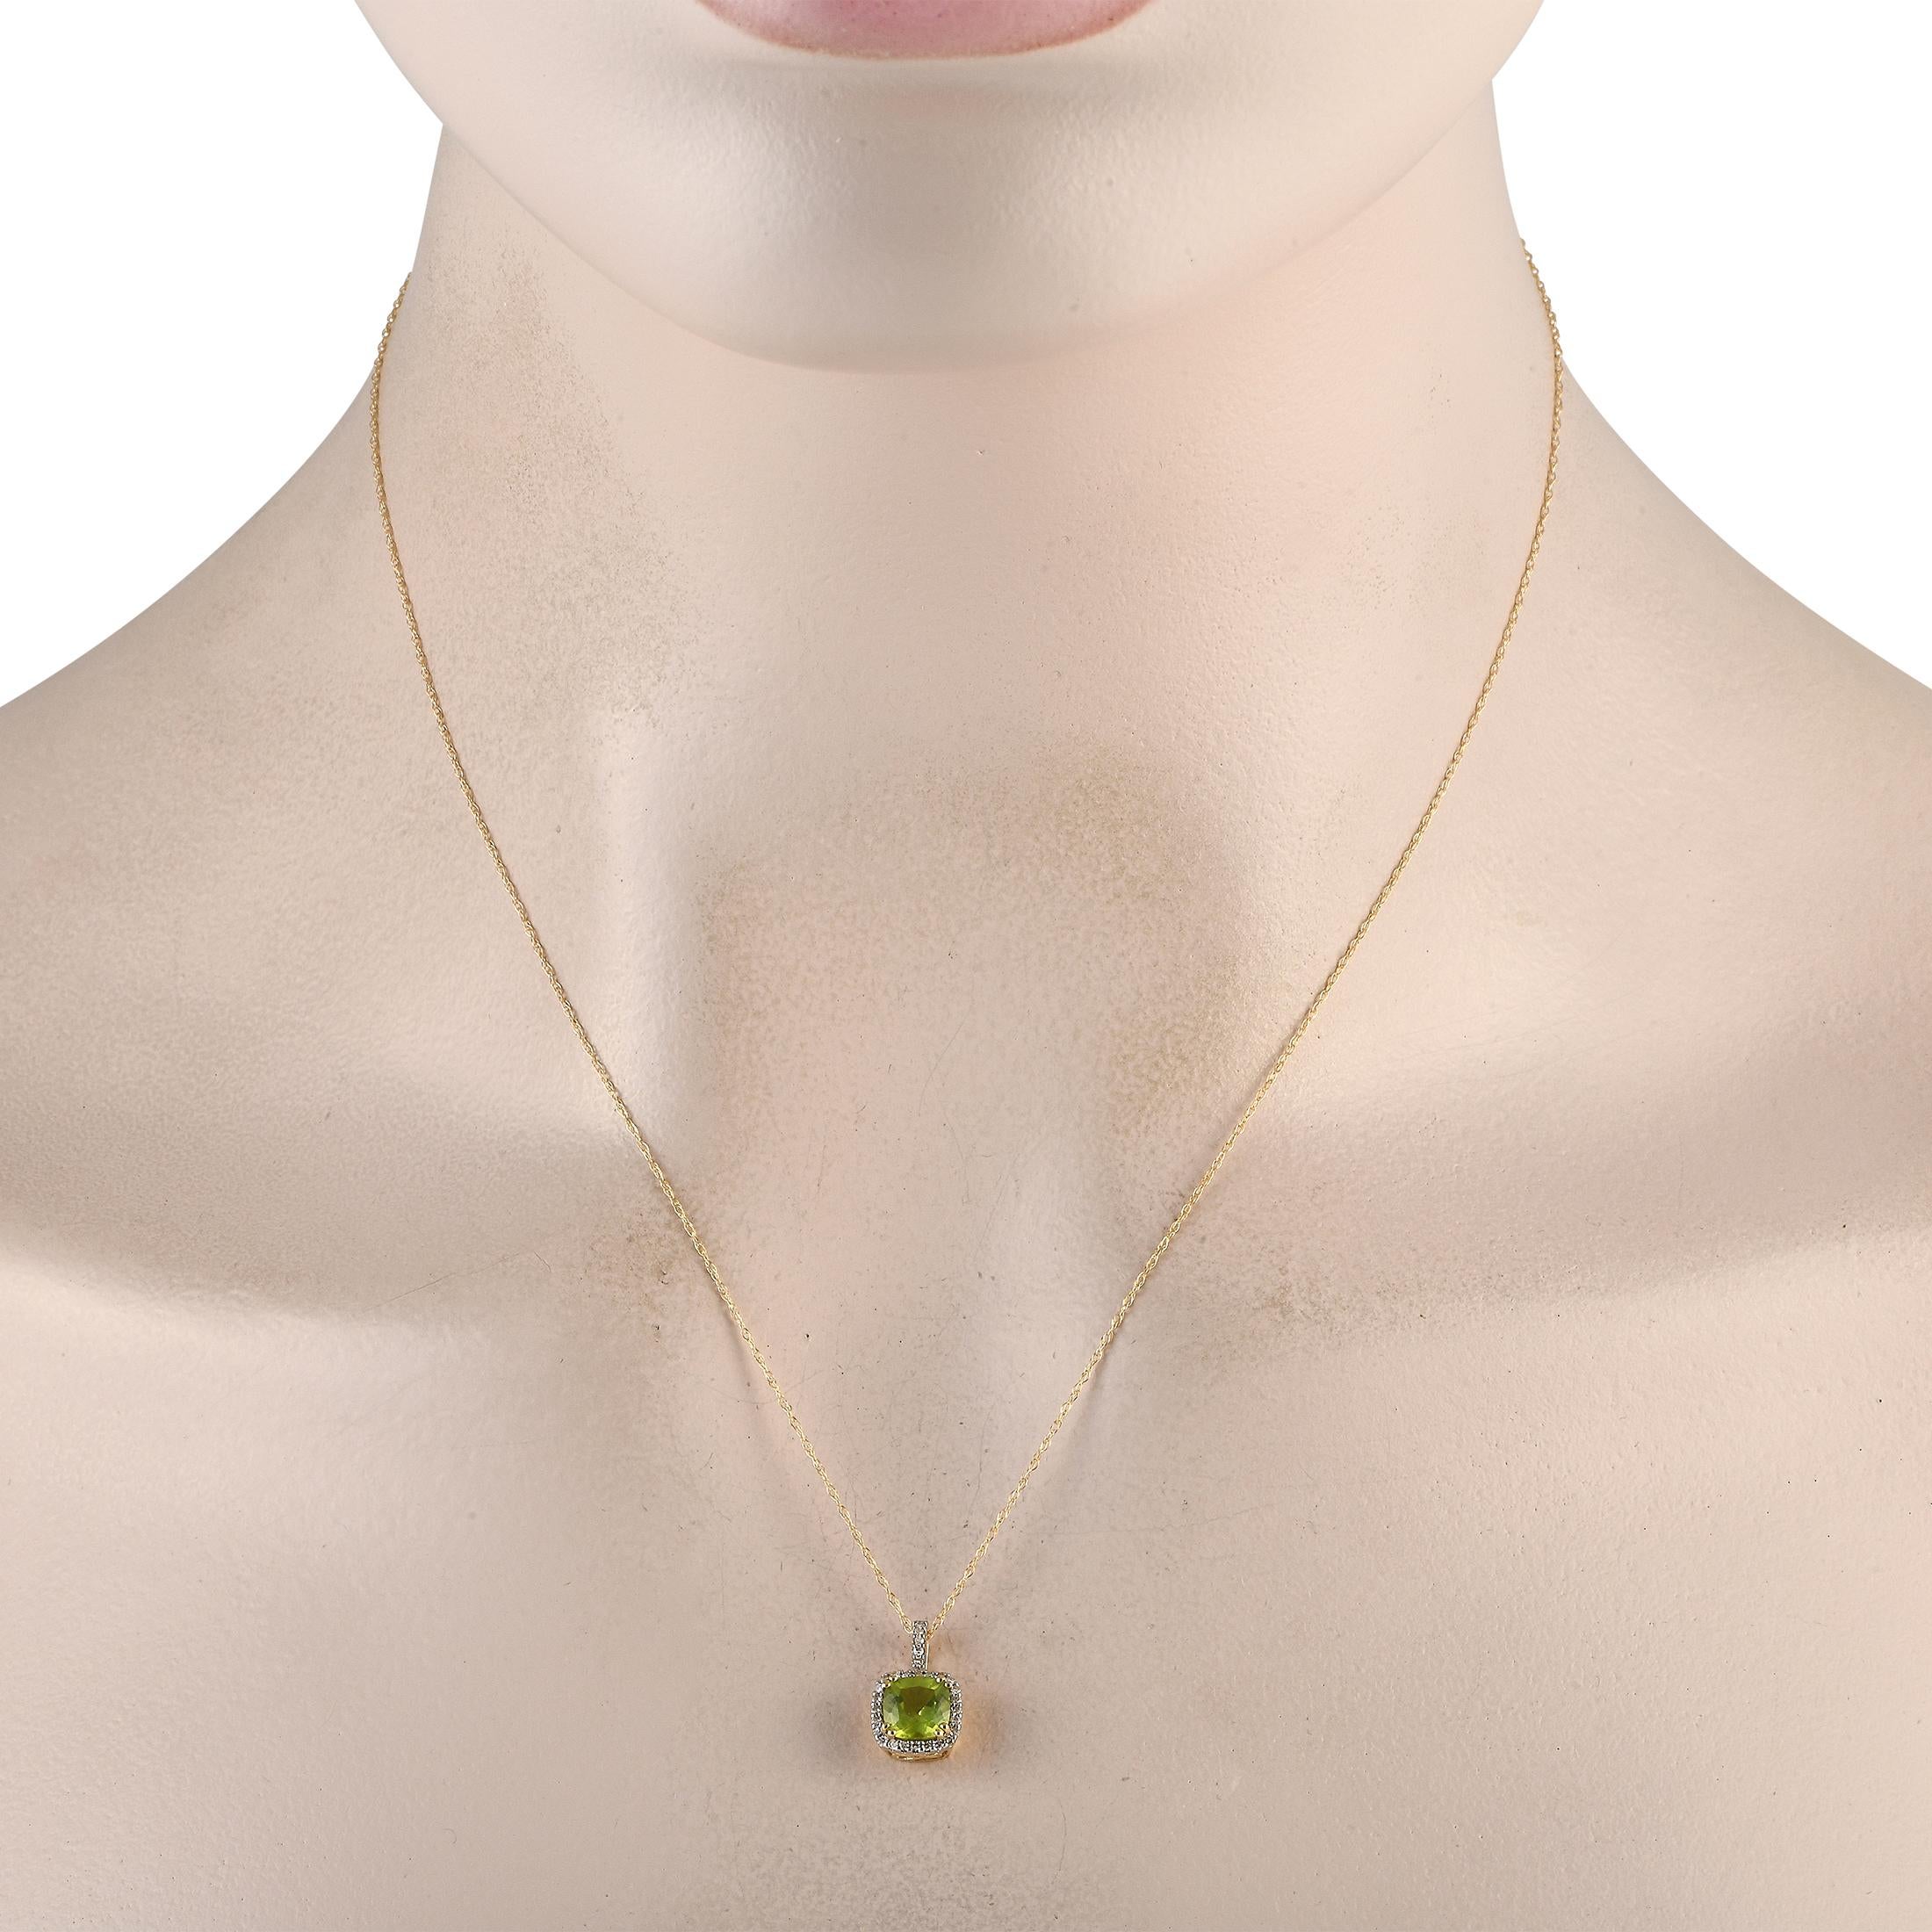 This luxurious necklace will never go out of style. Suspended from a delicate 18 chain, youll find an opulent 14K Yellow Gold pendant measuring 0.50 long by 0.25 wide. At the center, a stunning Peridot gemstone comes to life thanks to sparkling